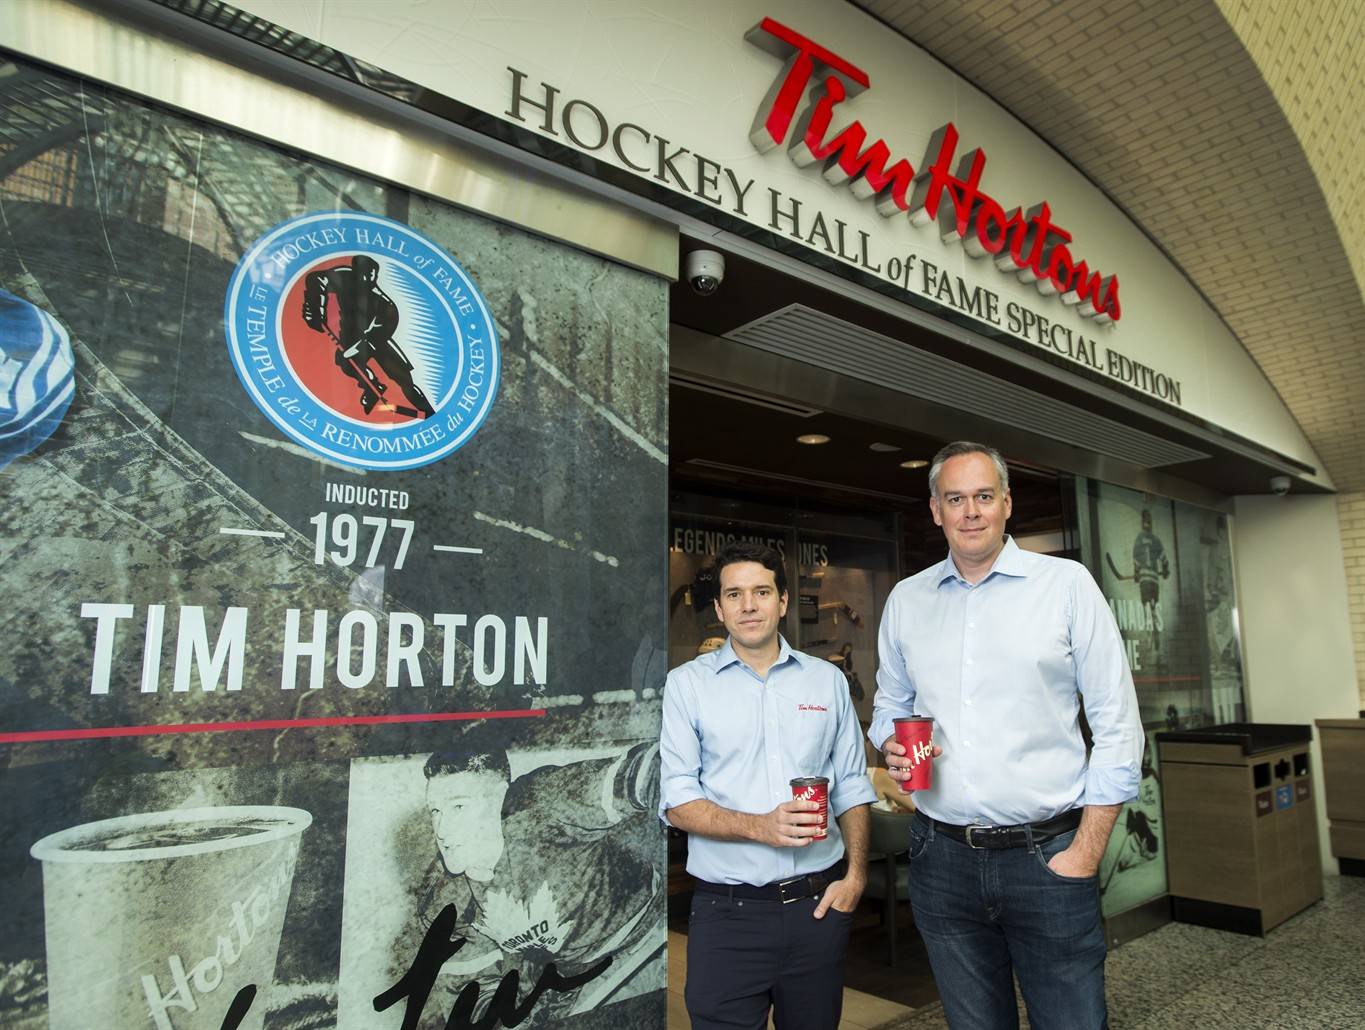 Alex Macedo, left, president at Tim Hortons and Duncan Fulton, chief corporate officer at Restaurant Brands International pose for a photograph at the Hockey Hall of Fame Tim Hortons location in Toronto on Thursday, August 16, 2018. THE CANADIAN PRESS/Nathan Denette